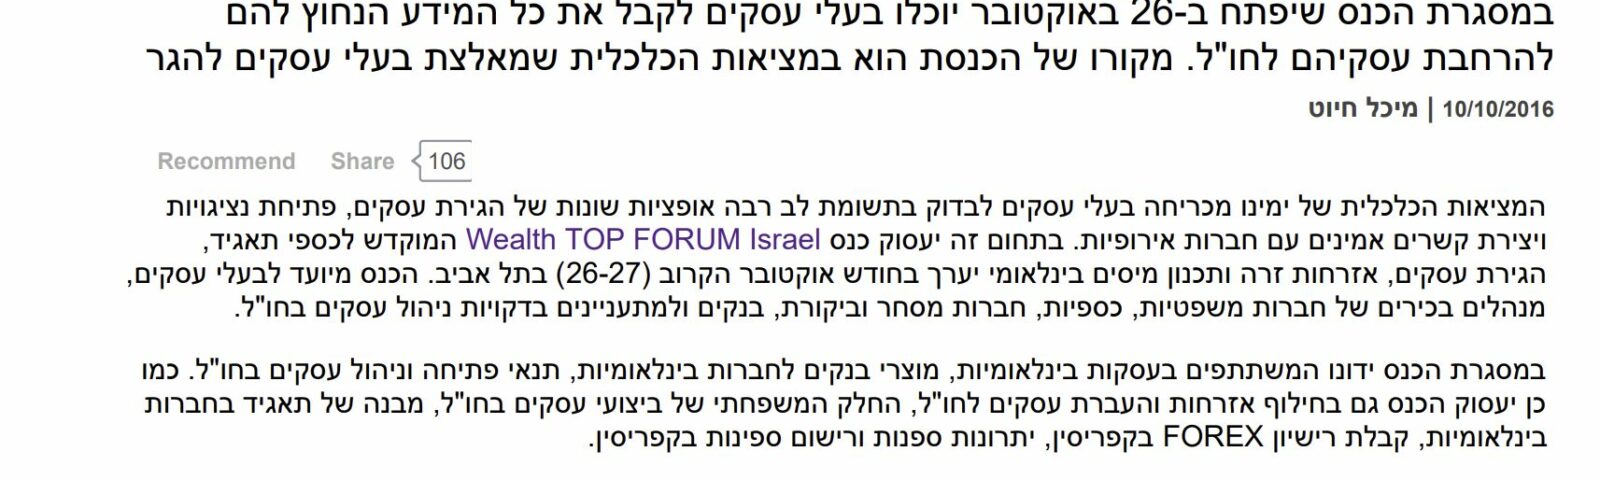 Forbes, Israel: Moderation by Doron Afik, Esq. of the Top Forum international conference